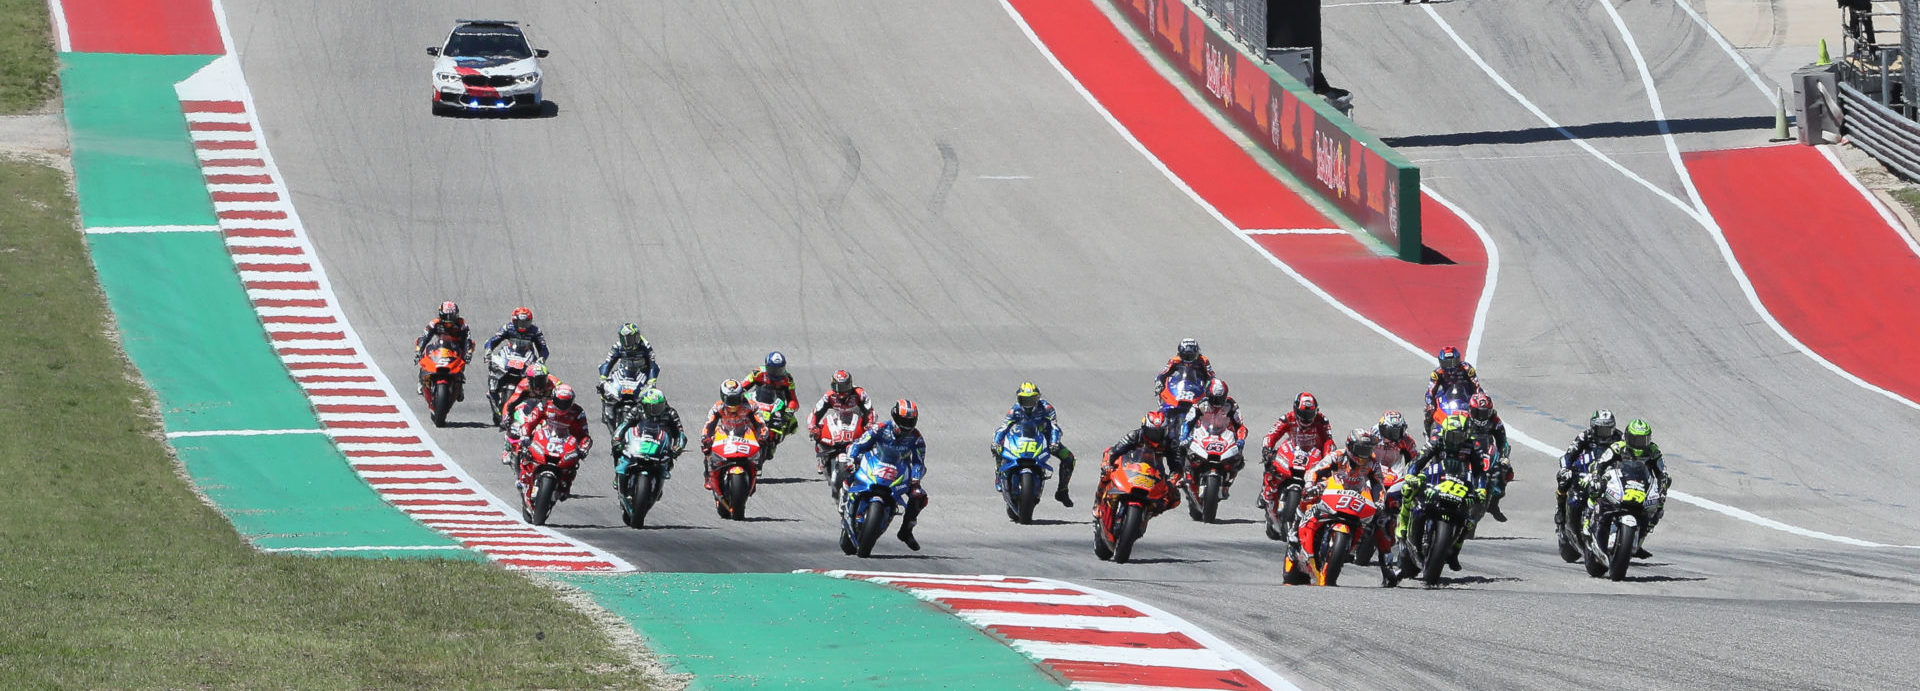 The start of the MotoGP race at Circuit of The Americas in 2019. Photo by Brian J. Nelson.